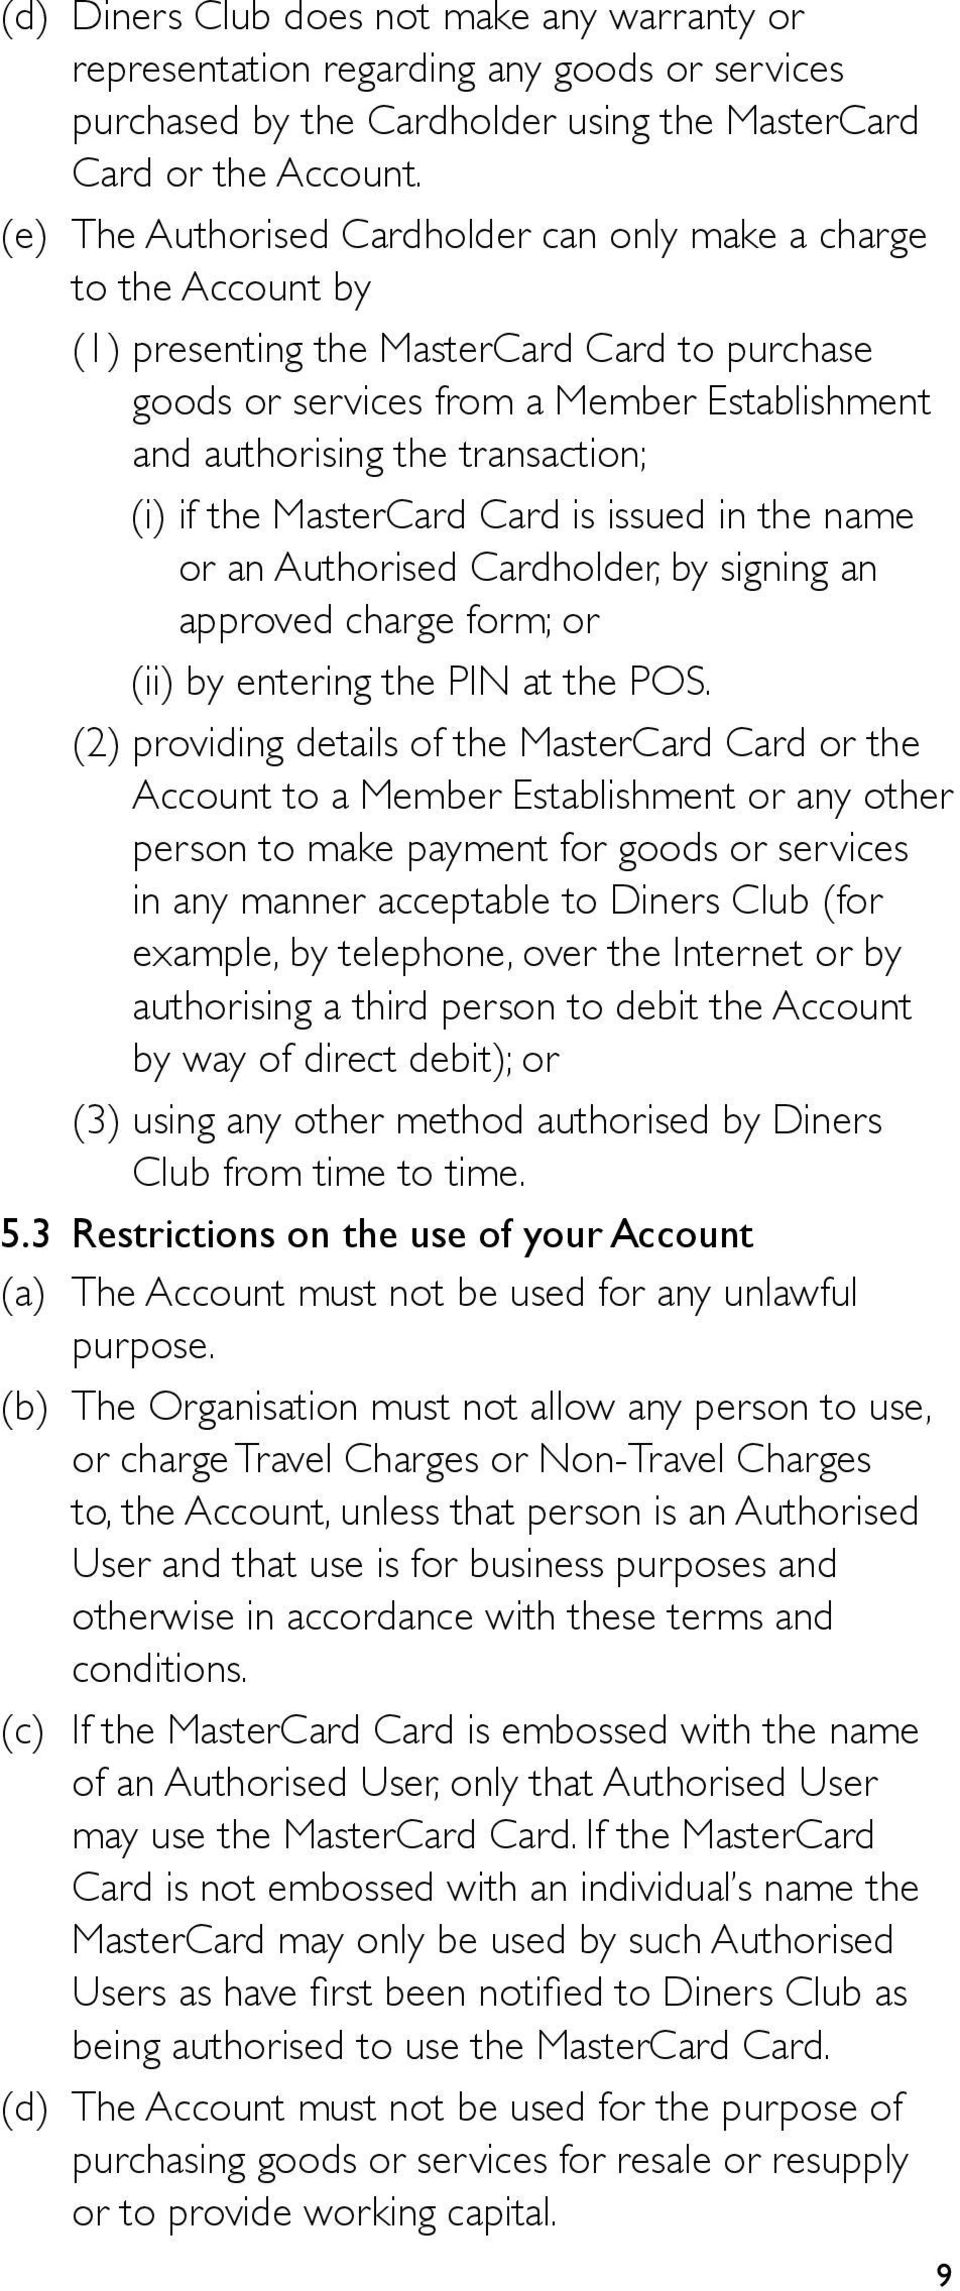 (i) if the MasterCard Card is issued in the name or an Authorised Cardholder, by signing an approved charge form; or (ii) by entering the PIN at the POS.